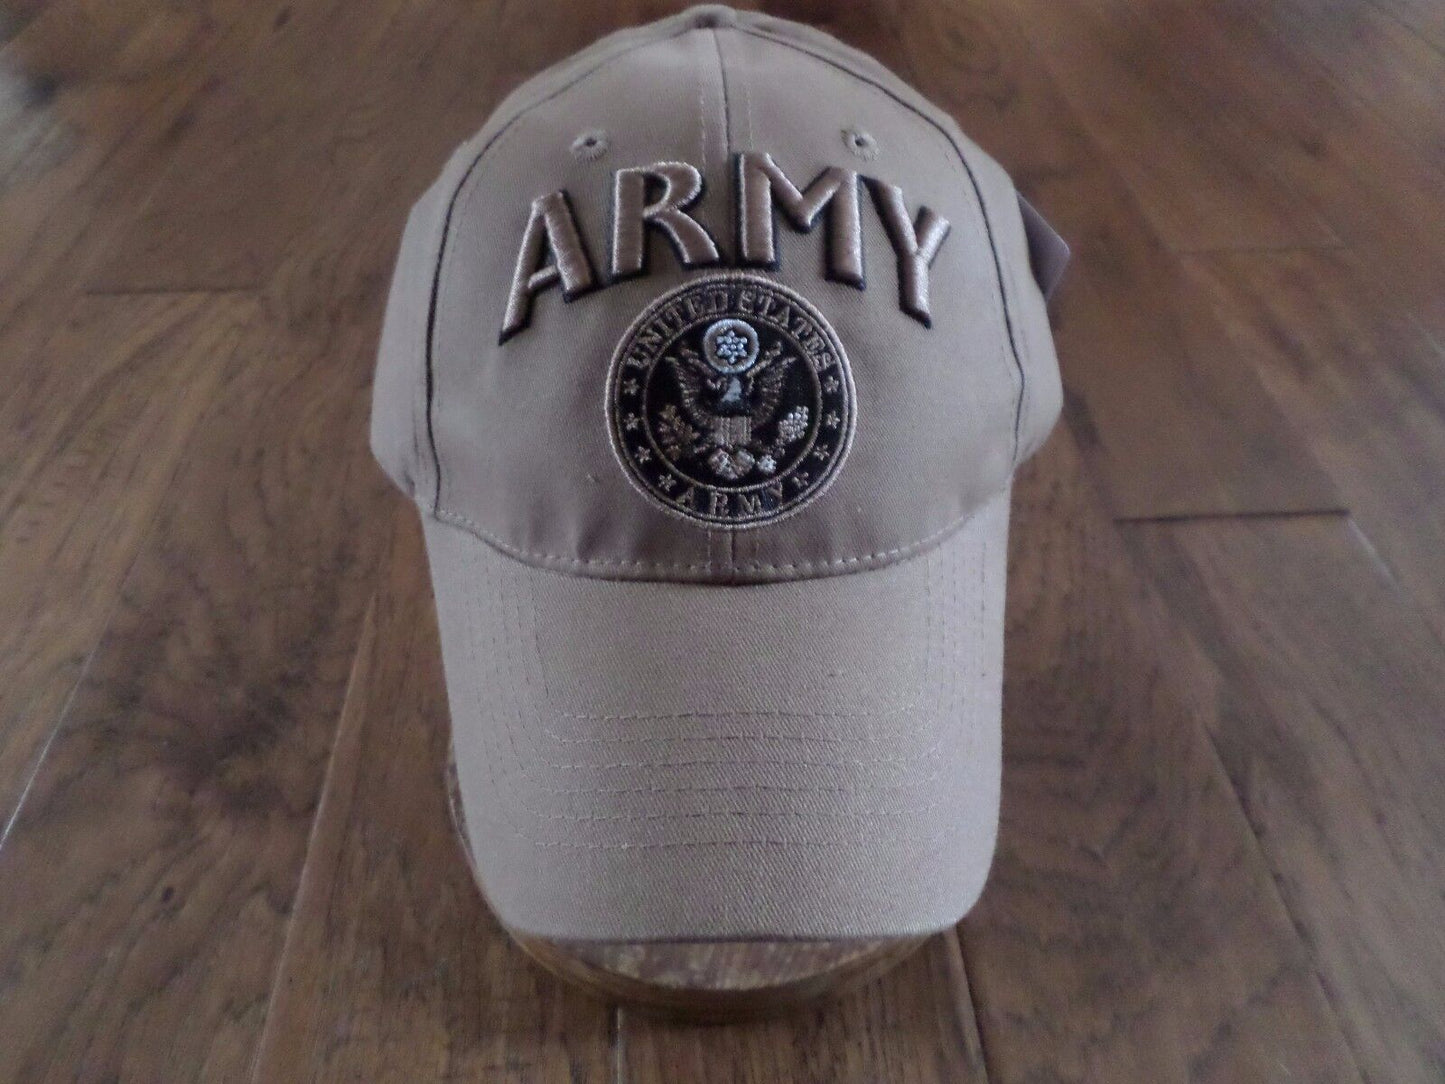 U.S MILITARY COYOTE BROWN ARMY HAT EMBROIDERED RAISED LETTERS OFFICIAL BALL CAP